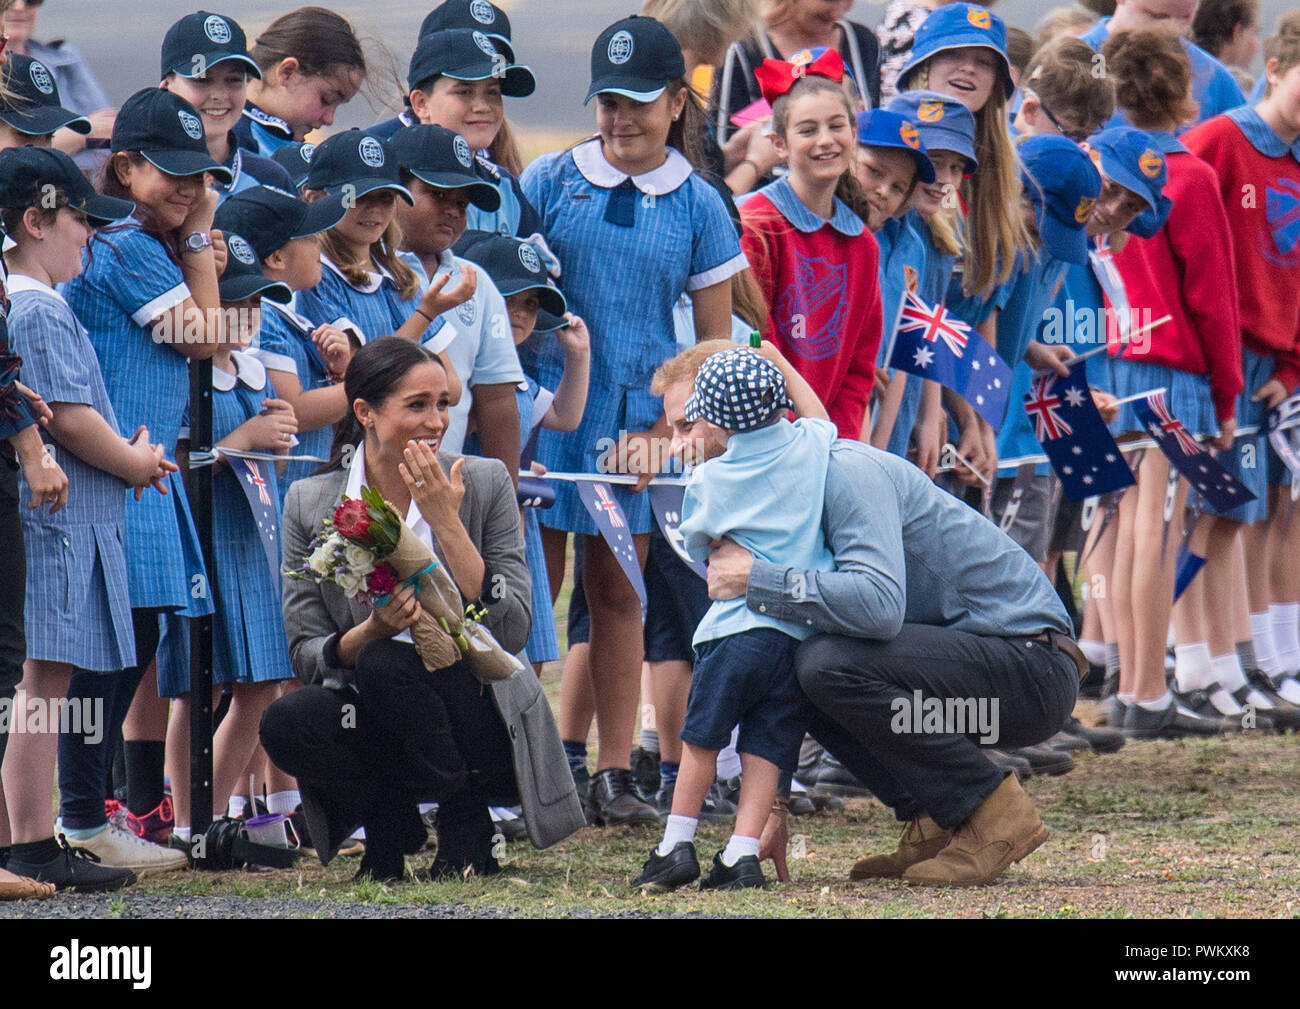 PICTURE RE-TRANSMITTED WITH ADDITIONAL CAPTION INFORMATION The Duke of Sussex hugs Luke Vincent, 5, as he and the Duchess of Sussex arrive at Dubbo City Regional Airport, in Dubbo, New South Wales, on the second day of the royal couple's visit to Australia. Stock Photo